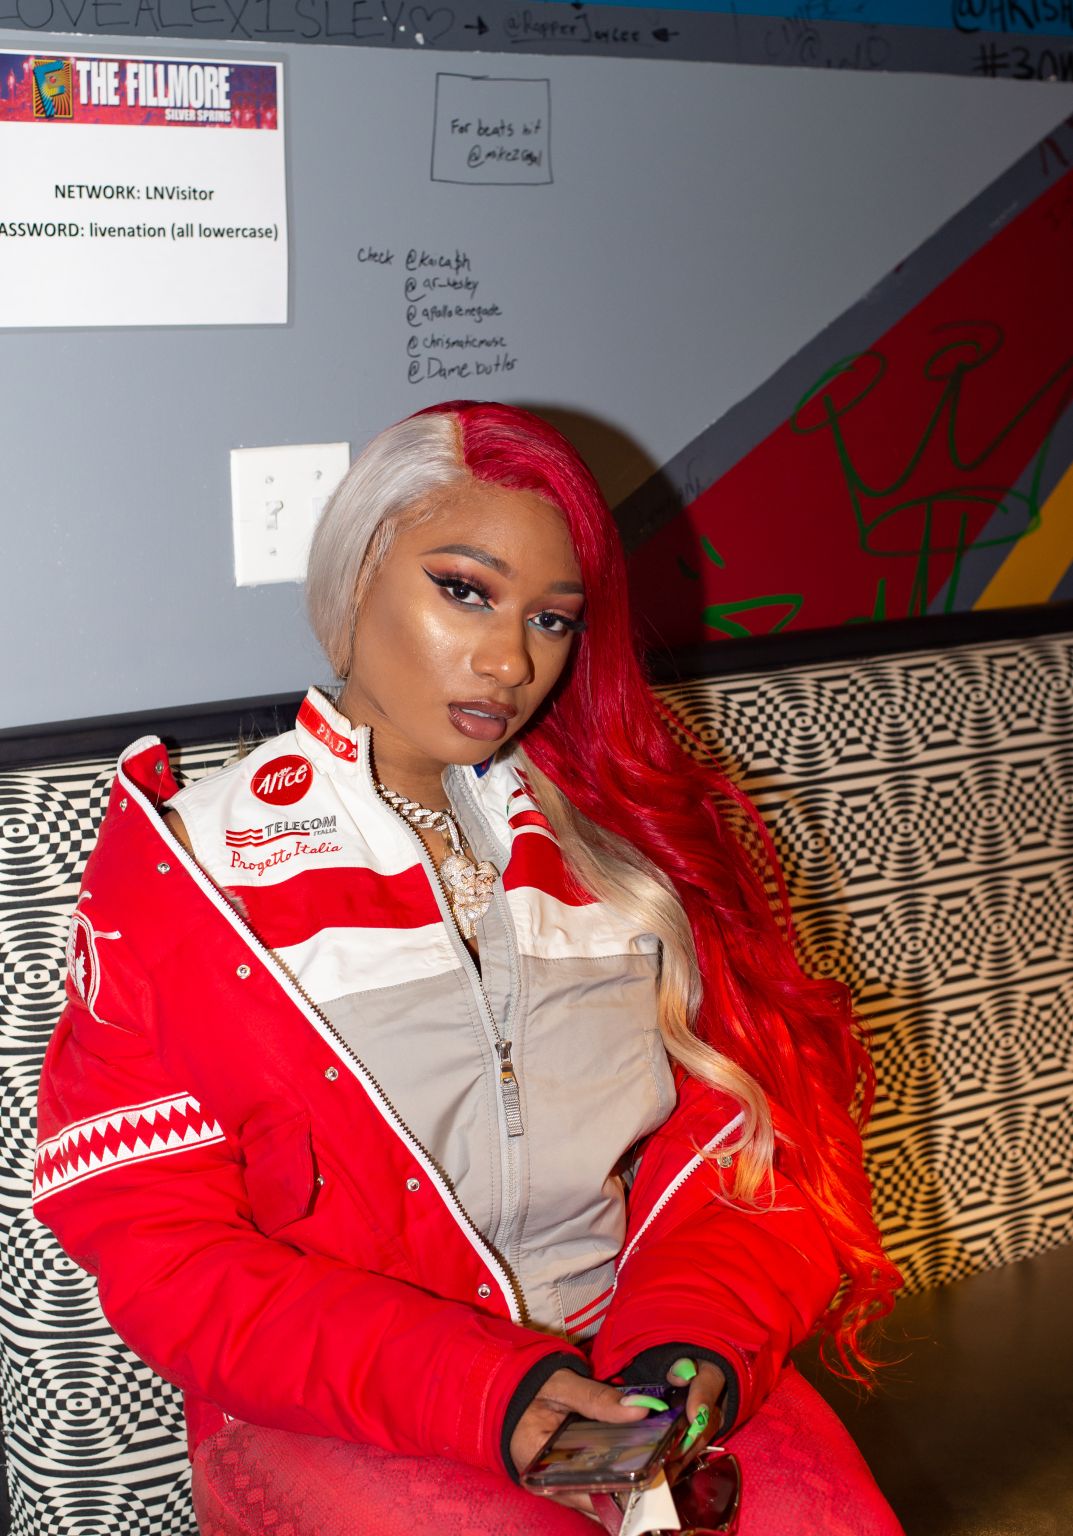 Watch: Megan Thee Stallion Brings the Beauties Out For “Realer” | 92 Q